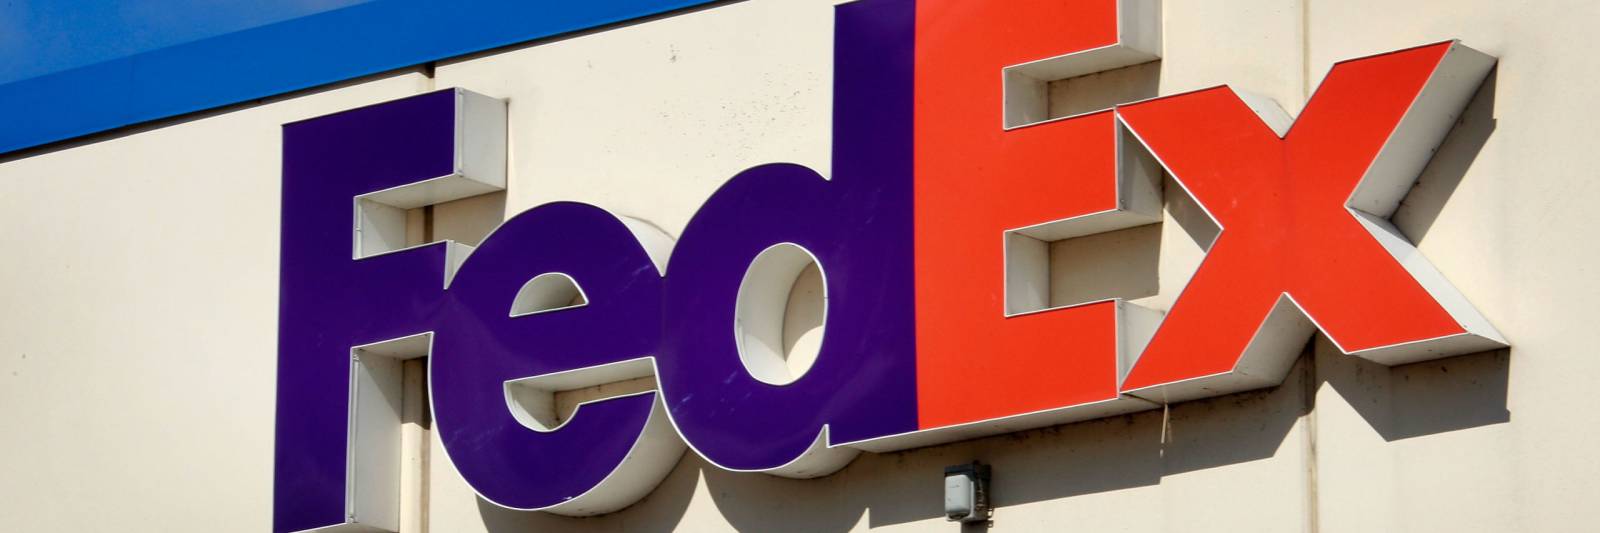 Hackers Hit 10,000 Mailboxes In Phishing Attacks On Fedex And